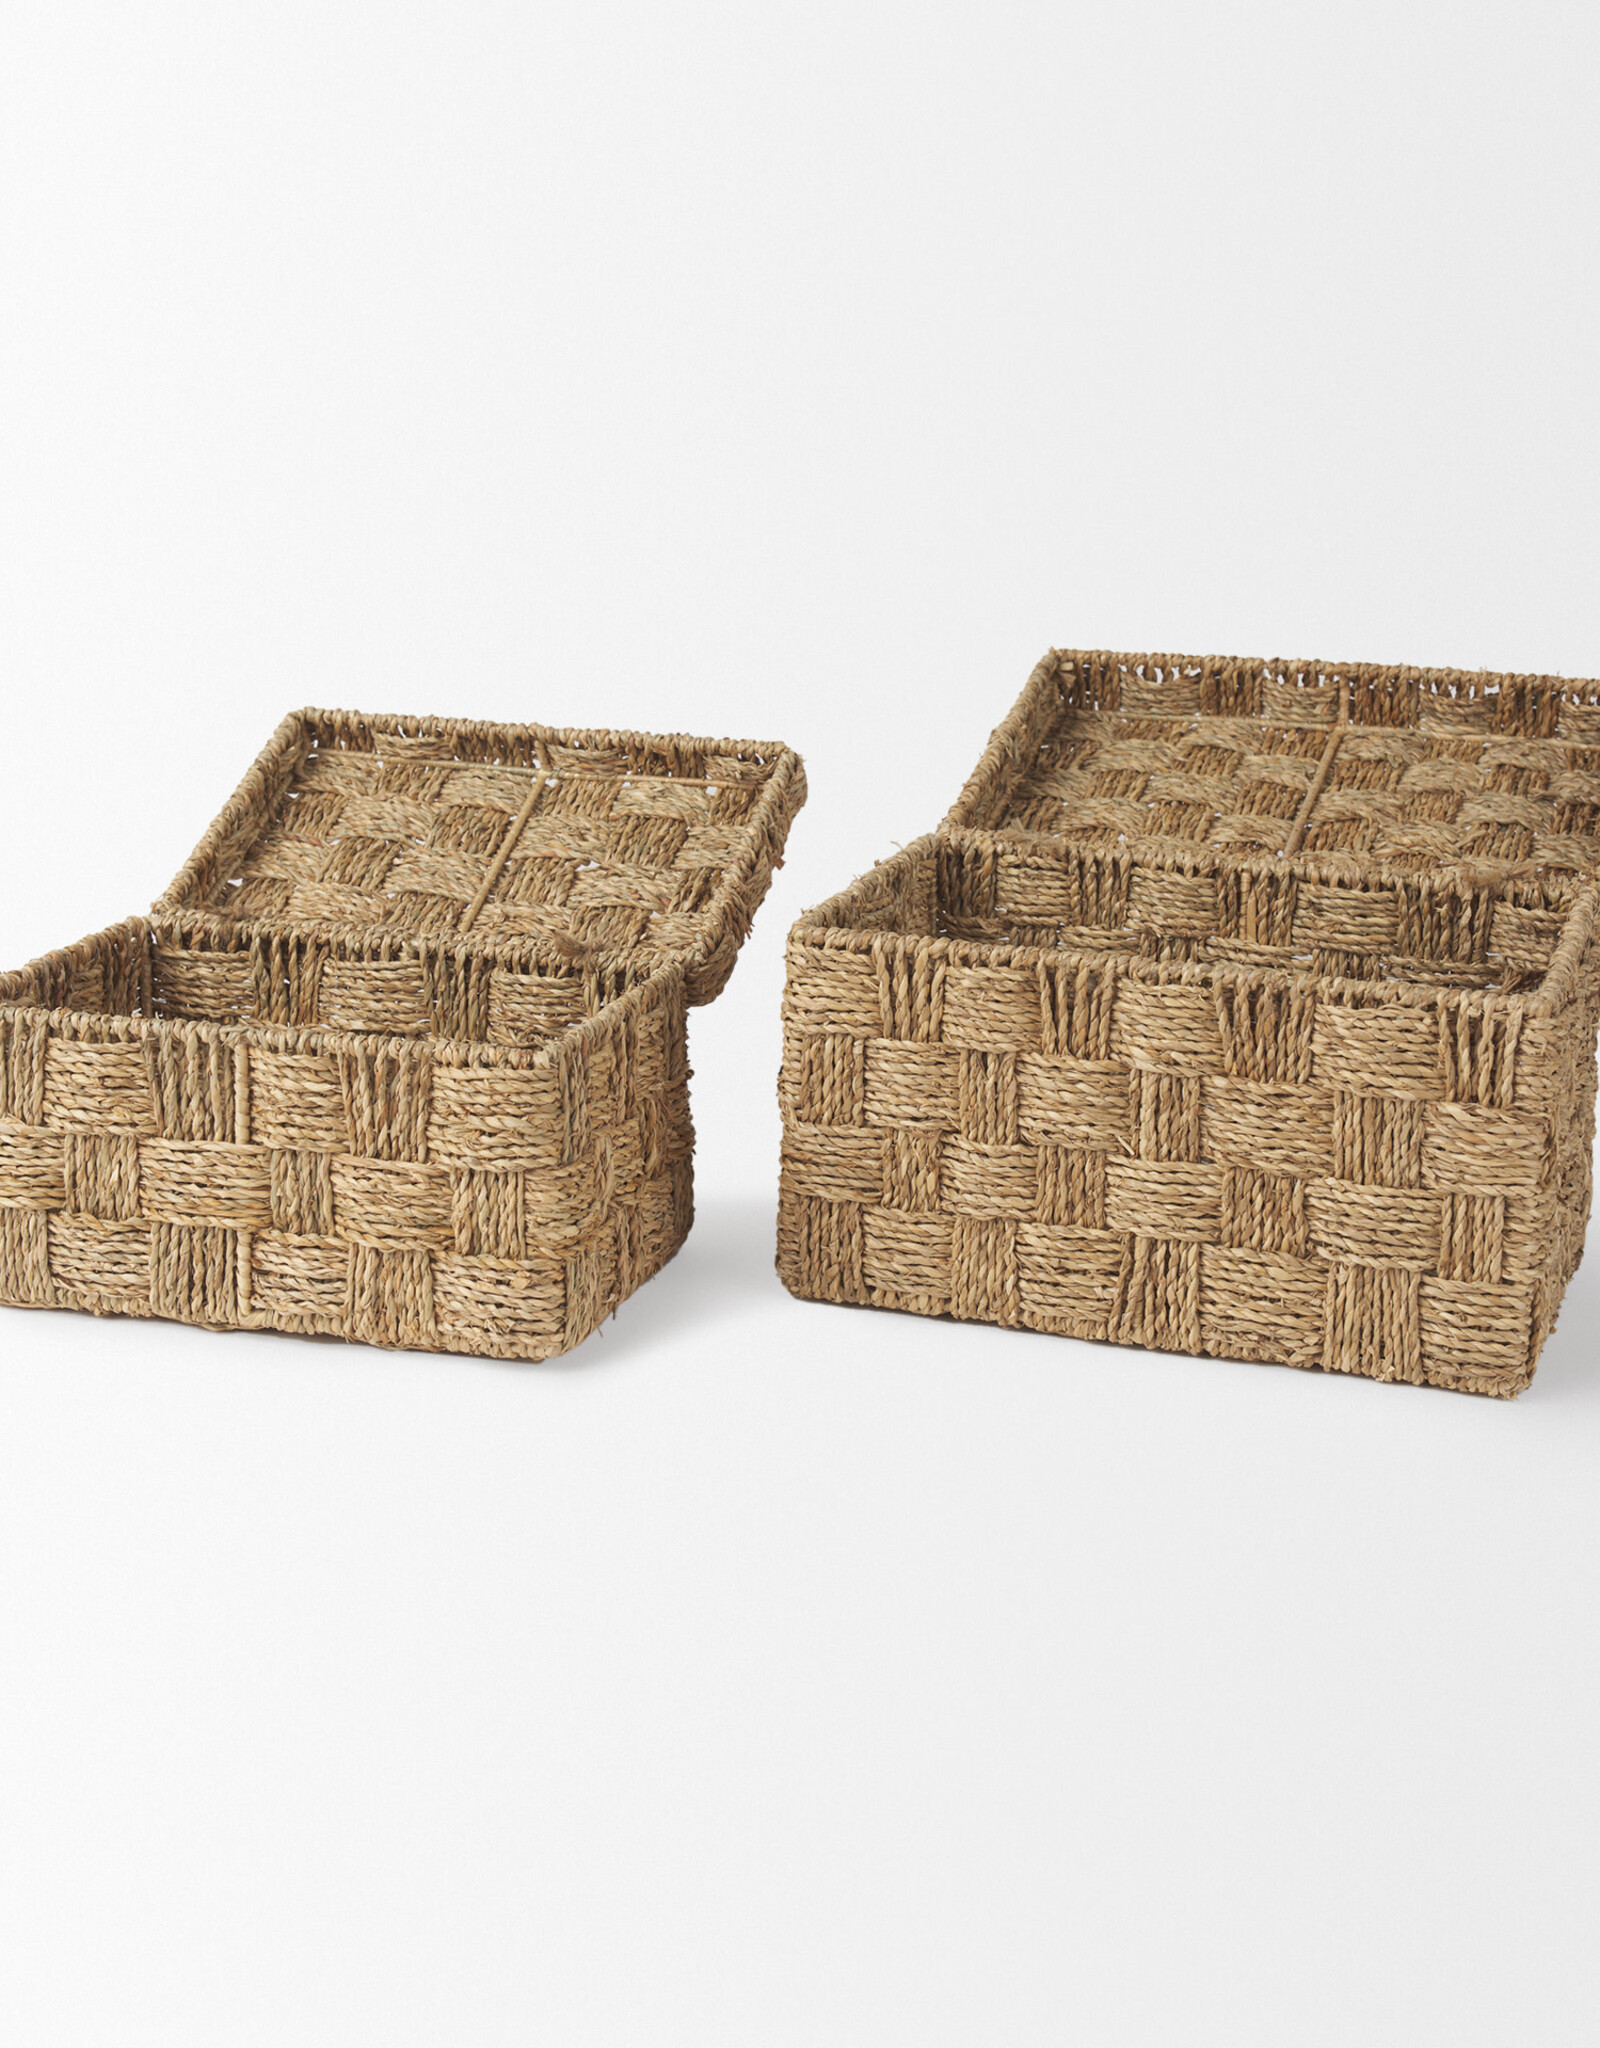 Hanalei Set of 2 Seagrass Boxes with Lids